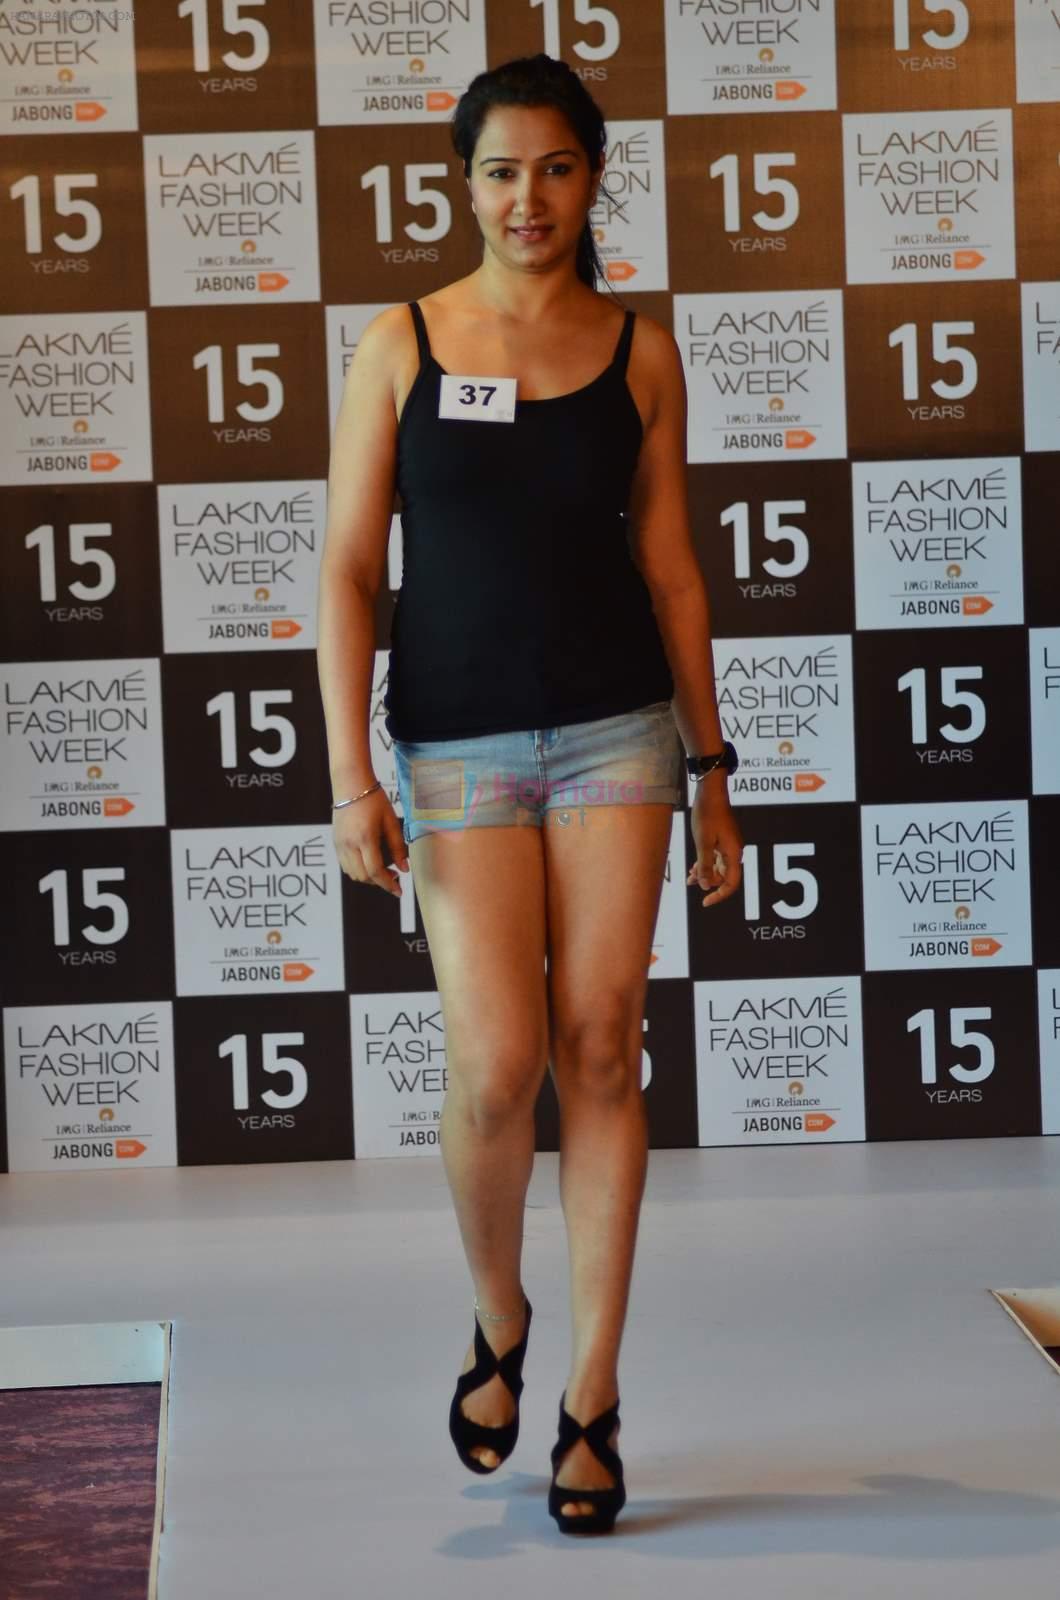 at Lakme Fashion Week Auditions in Palladium on 15th July 2015